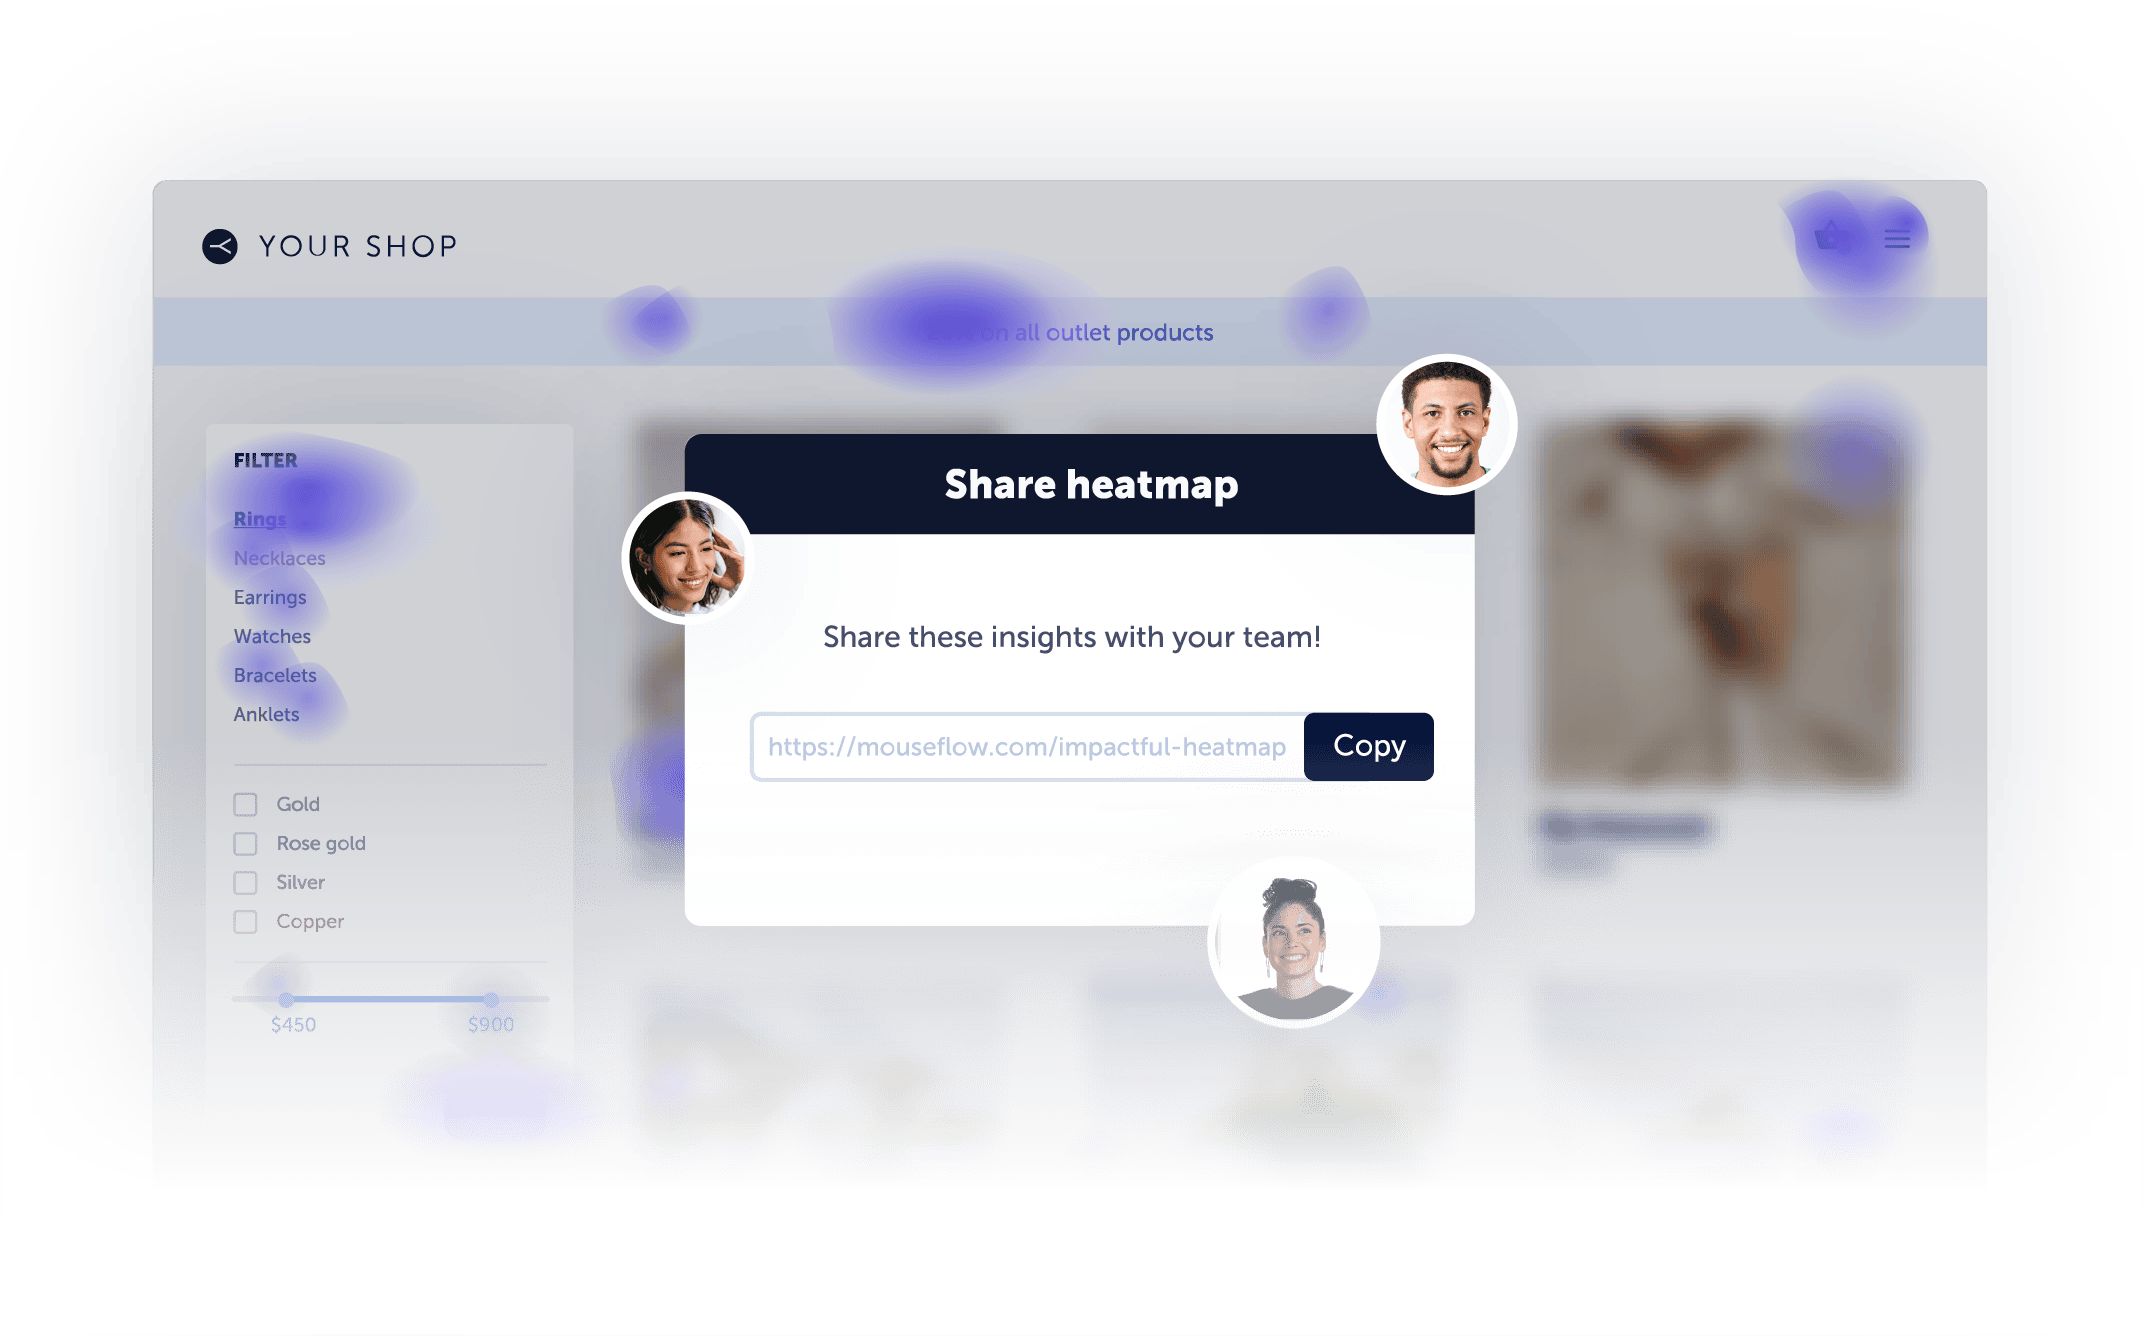 A screen showcasing the possibility of sharing heatmaps with your team and colleagues.